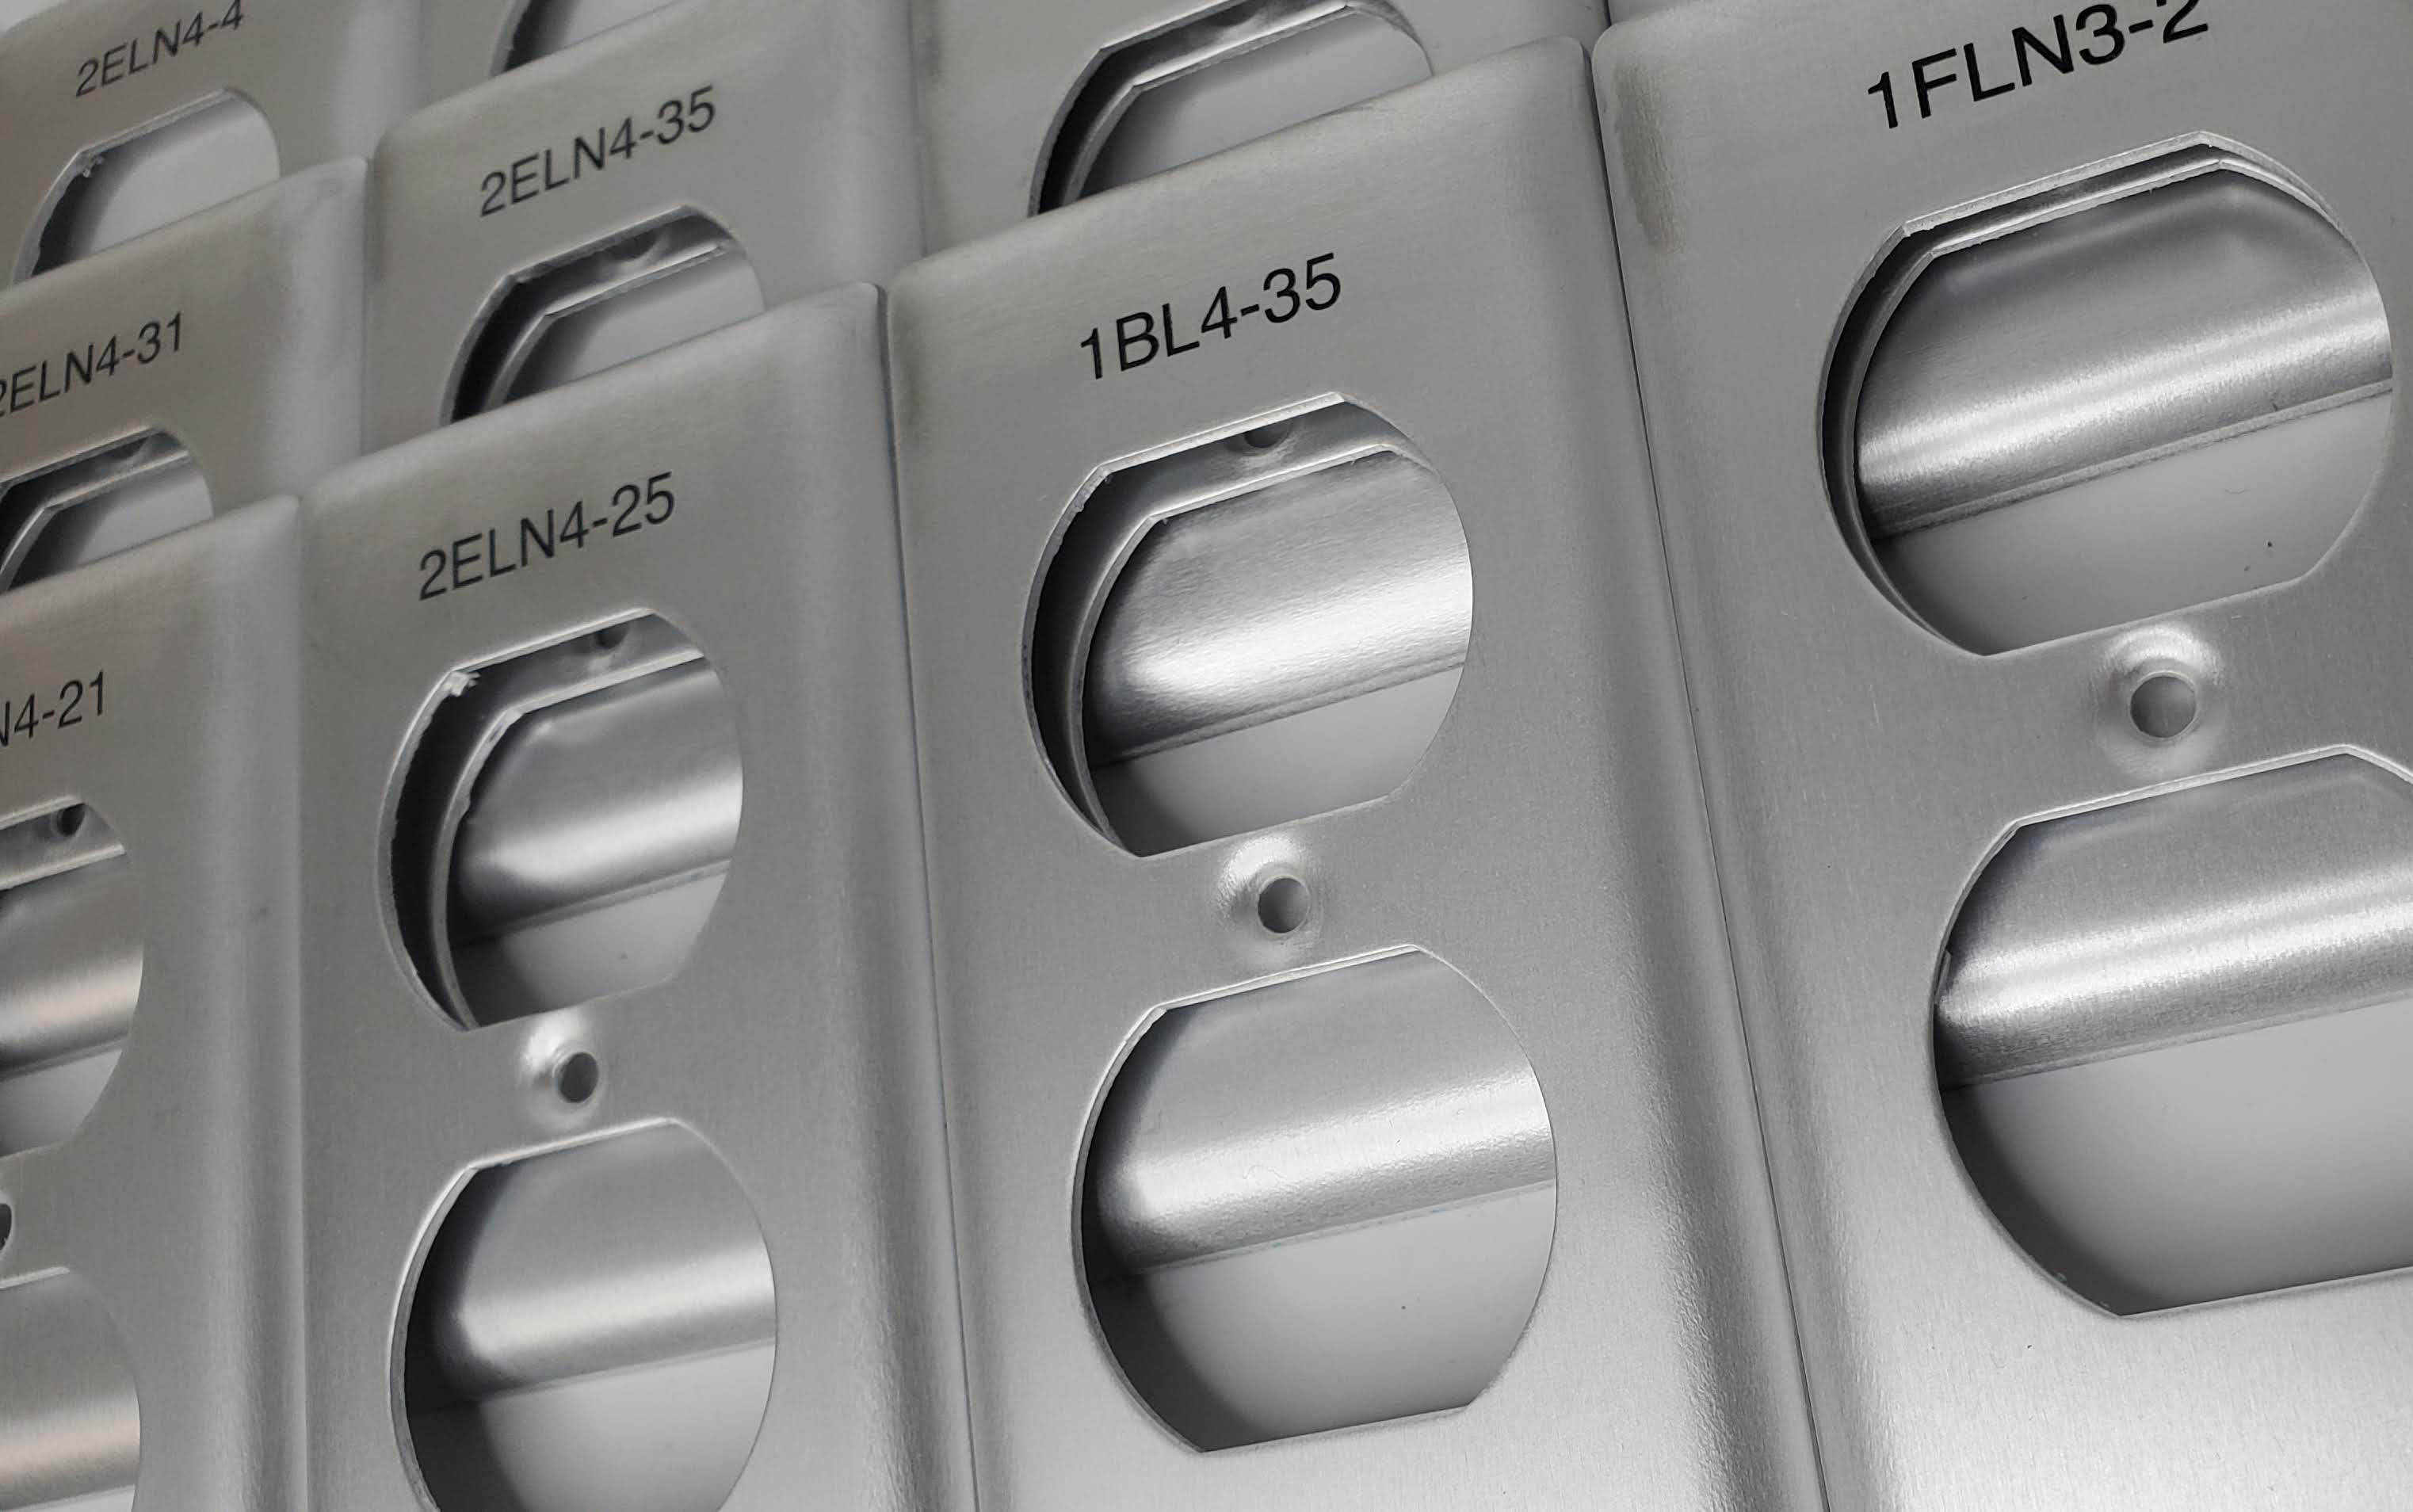 Switch Secure, Walls Informed: Laser Engraved Solutions for Organized Safety.